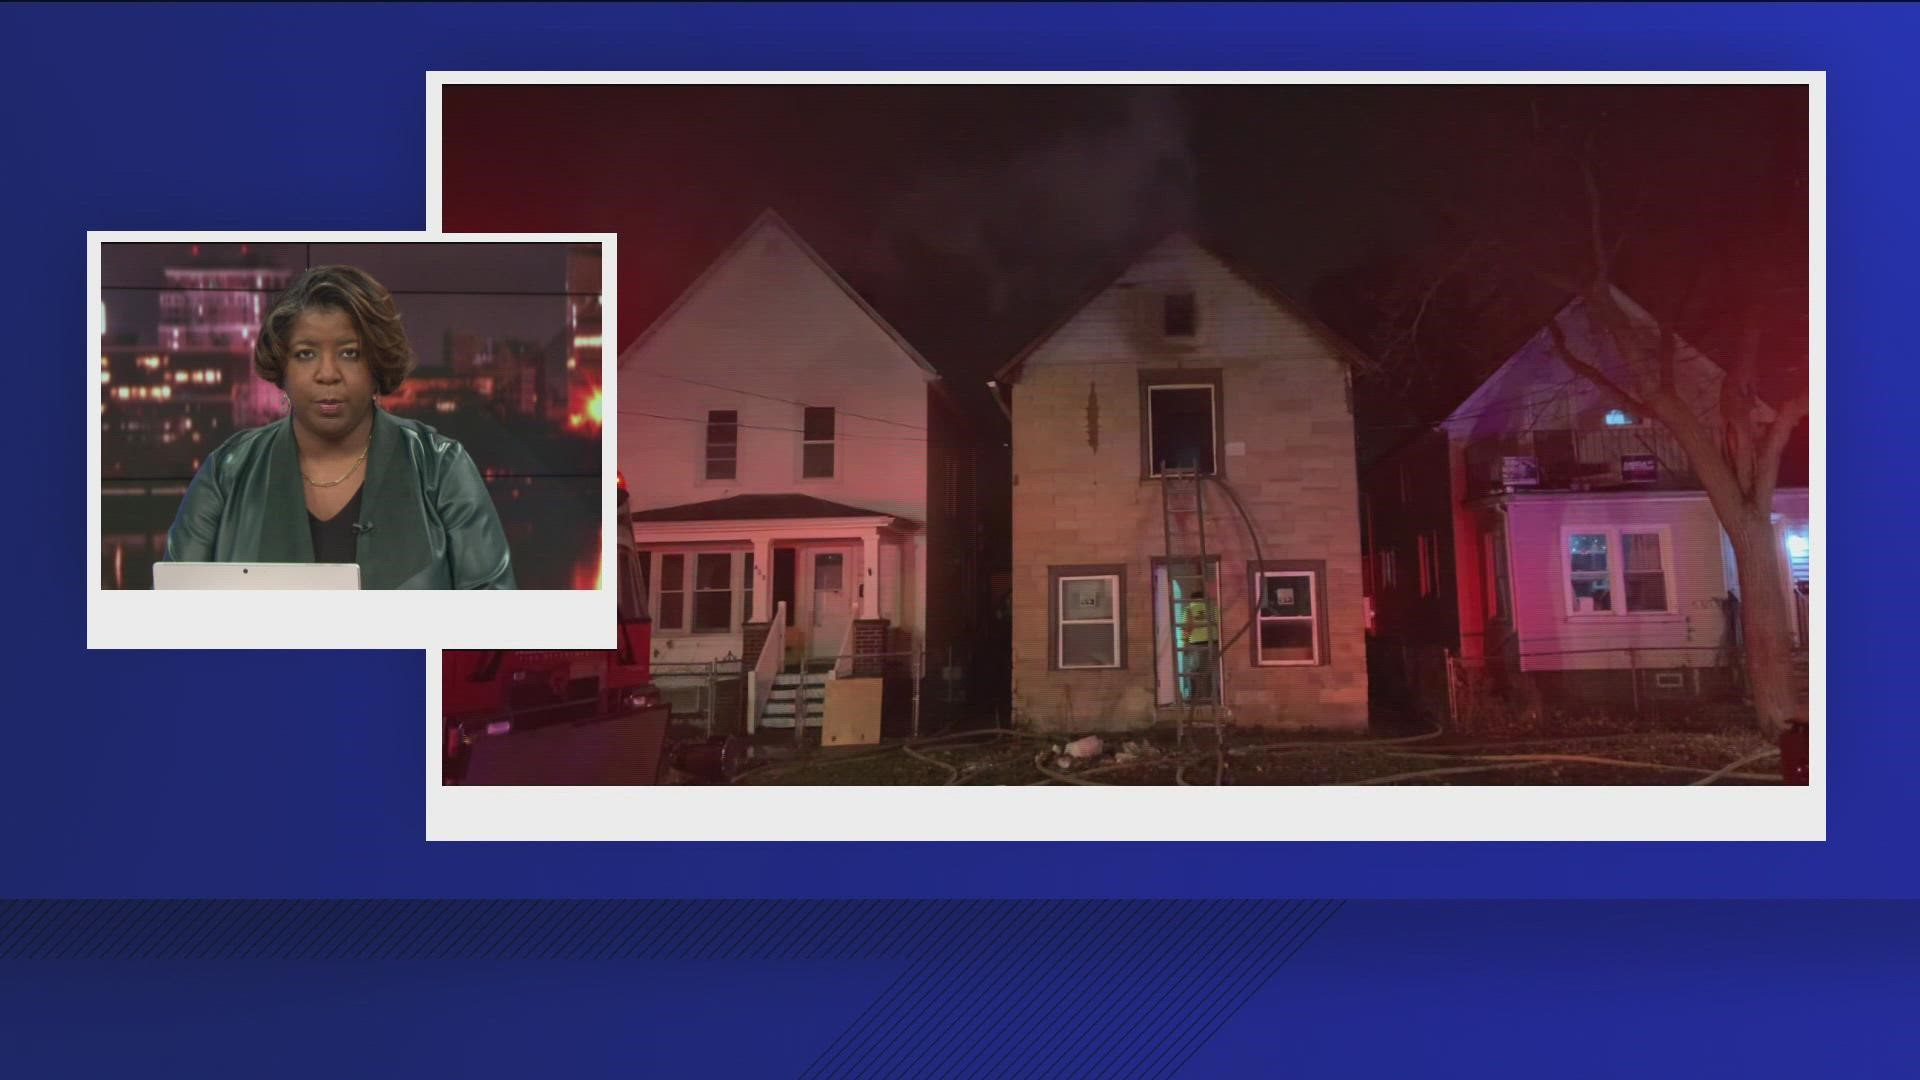 One firefighter was injured as crews battled the heavy flames, but they are expected to be OK.